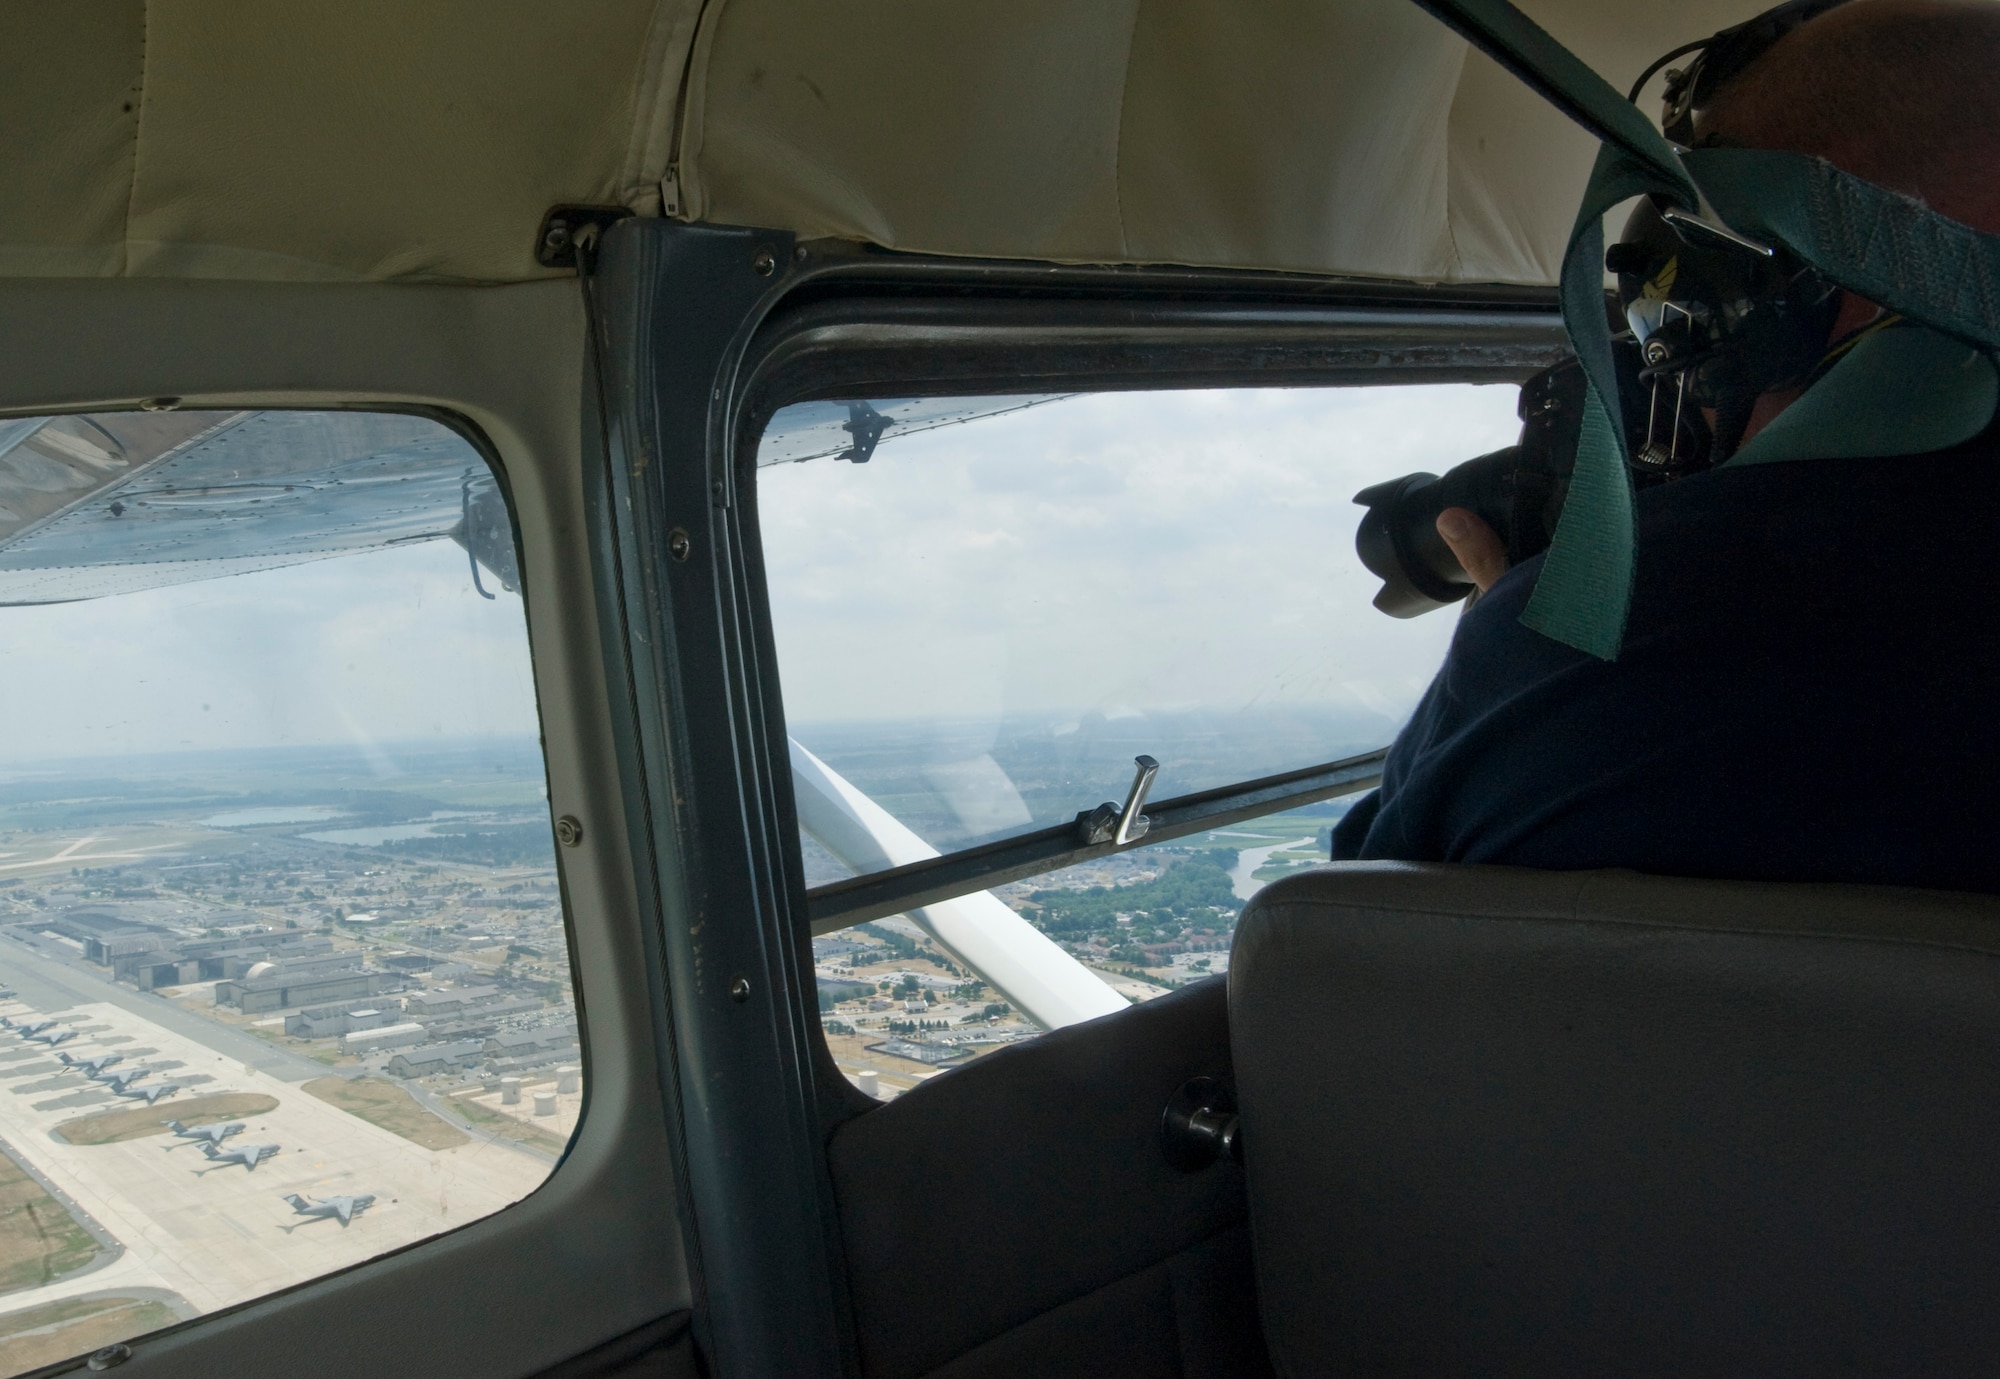 Clive Bennett of Aviation News Magazine takes photographs of Dover Air Force Base, Del., while inside a plane flown by a member of the Aero Club July 16, 2012. (U.S. Air Force photo by Senior Airman Jacob Morgan) 